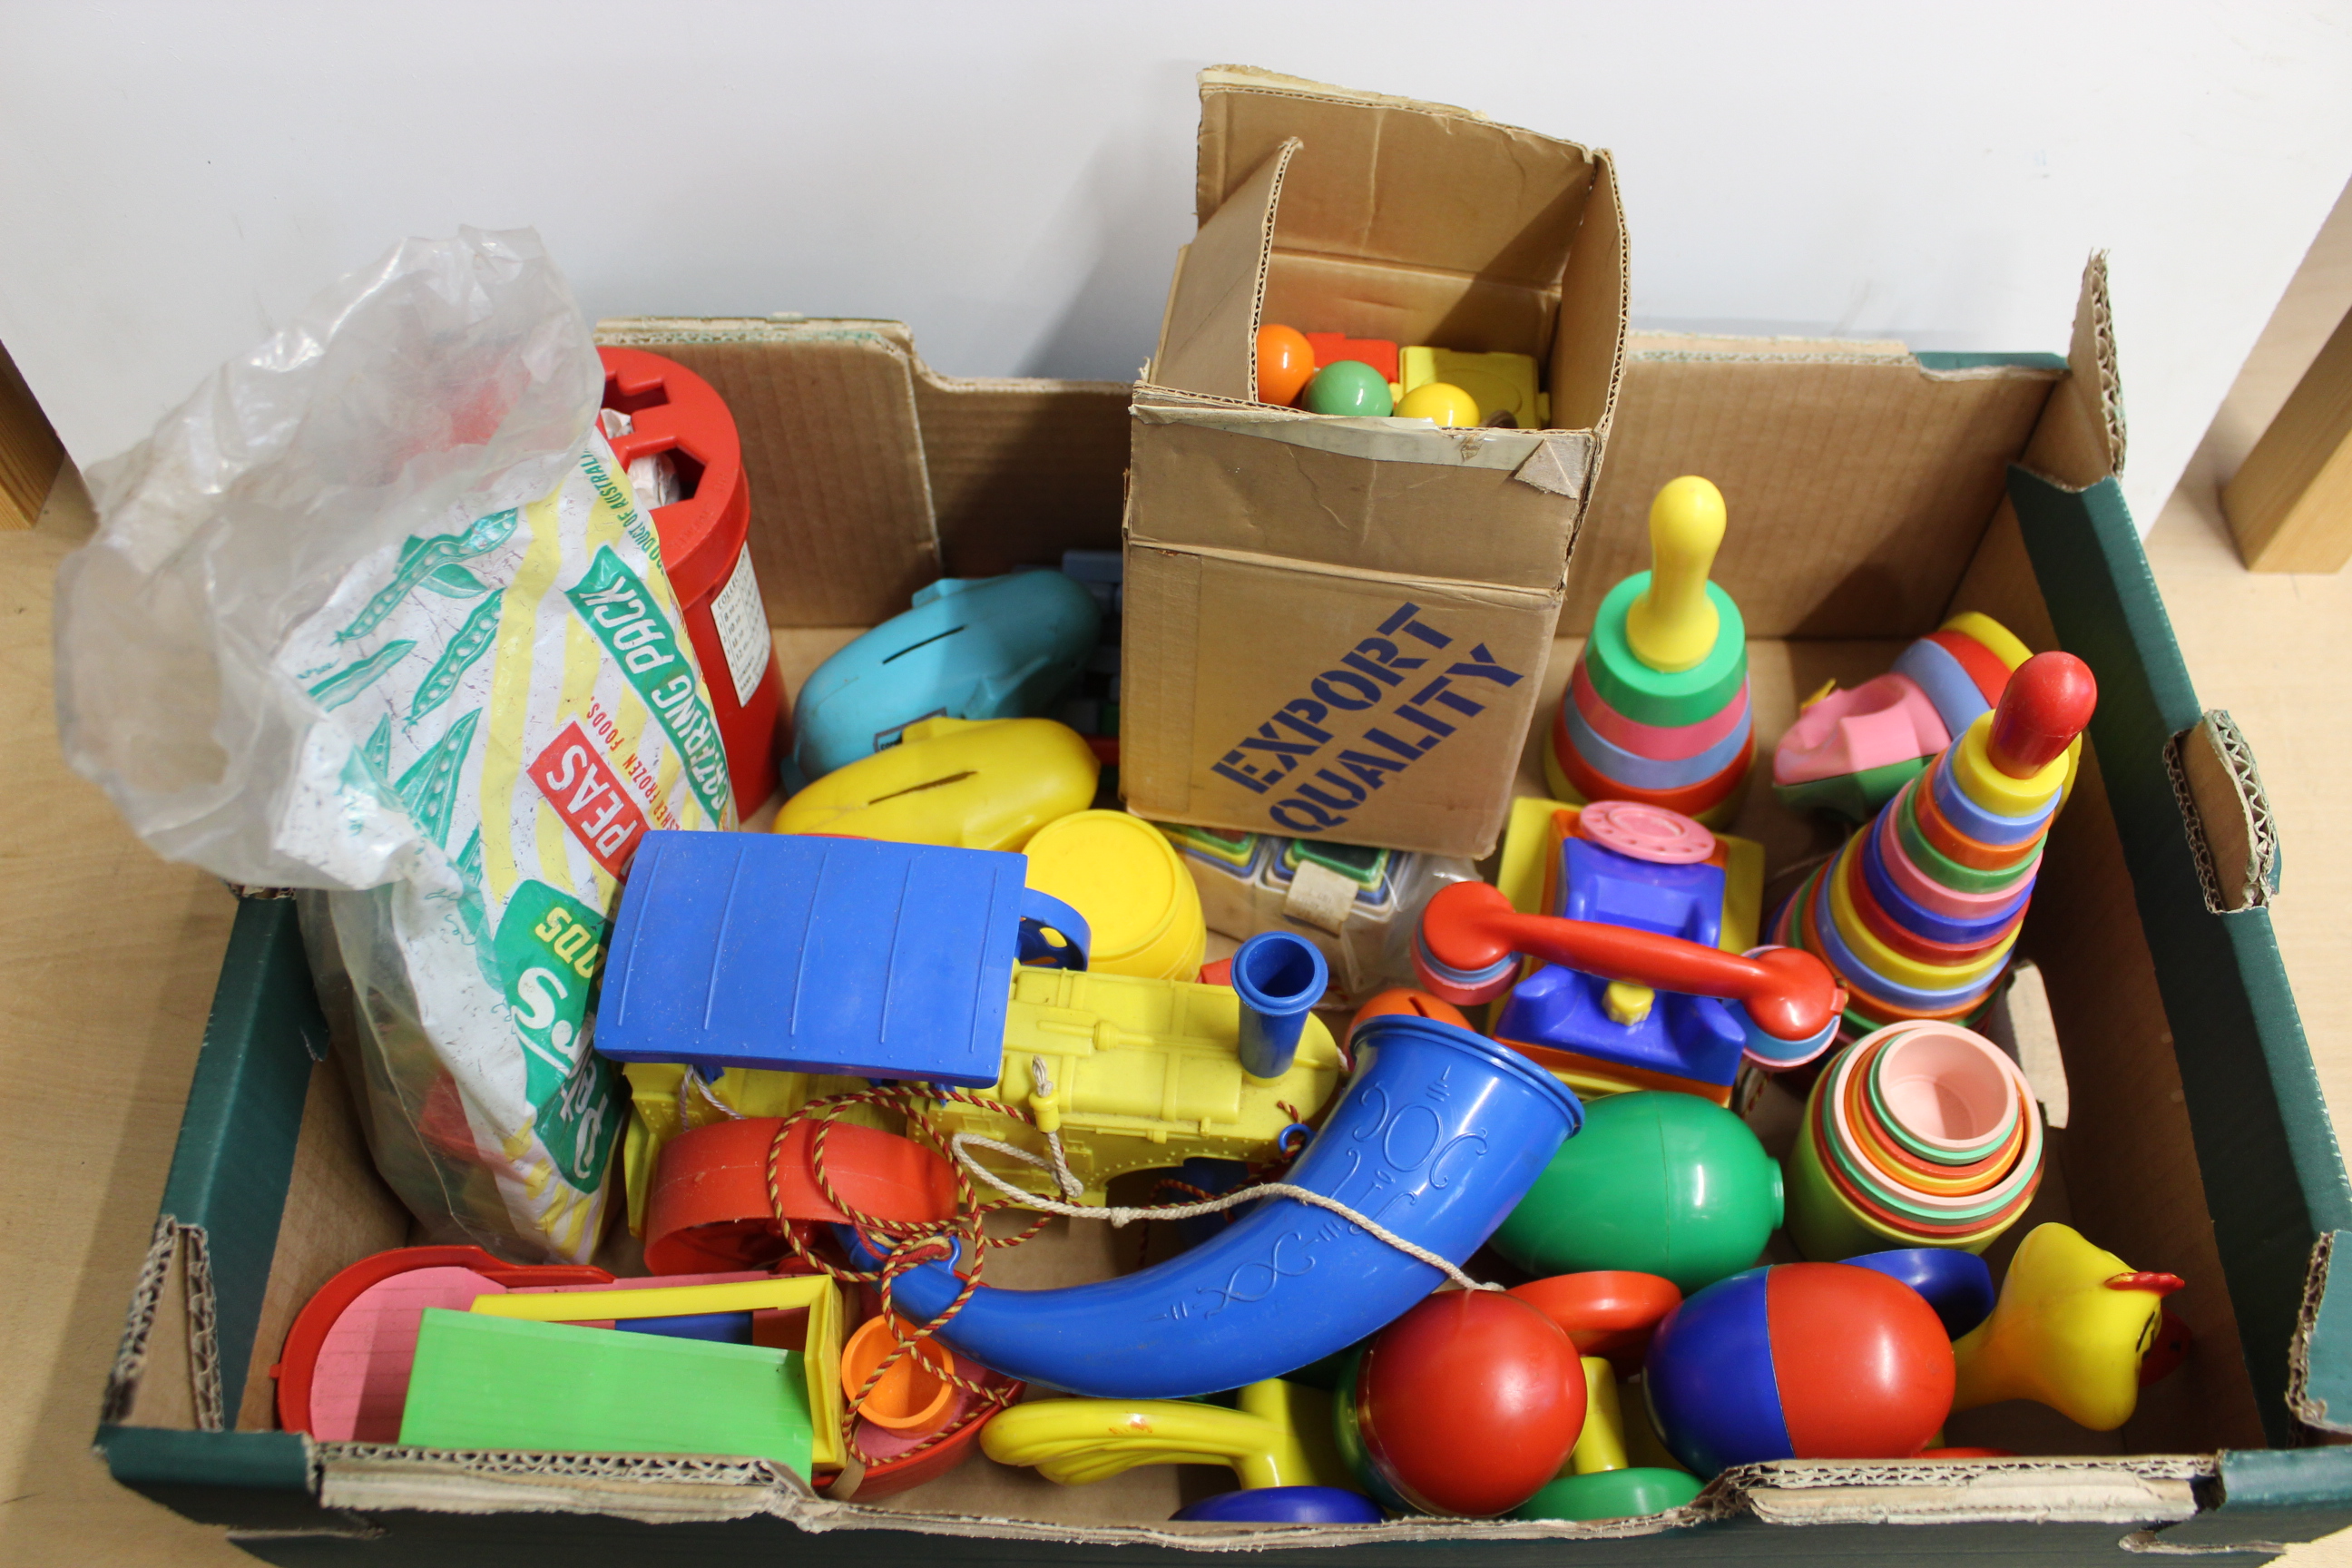 A box of mixed childrens play/learning toys